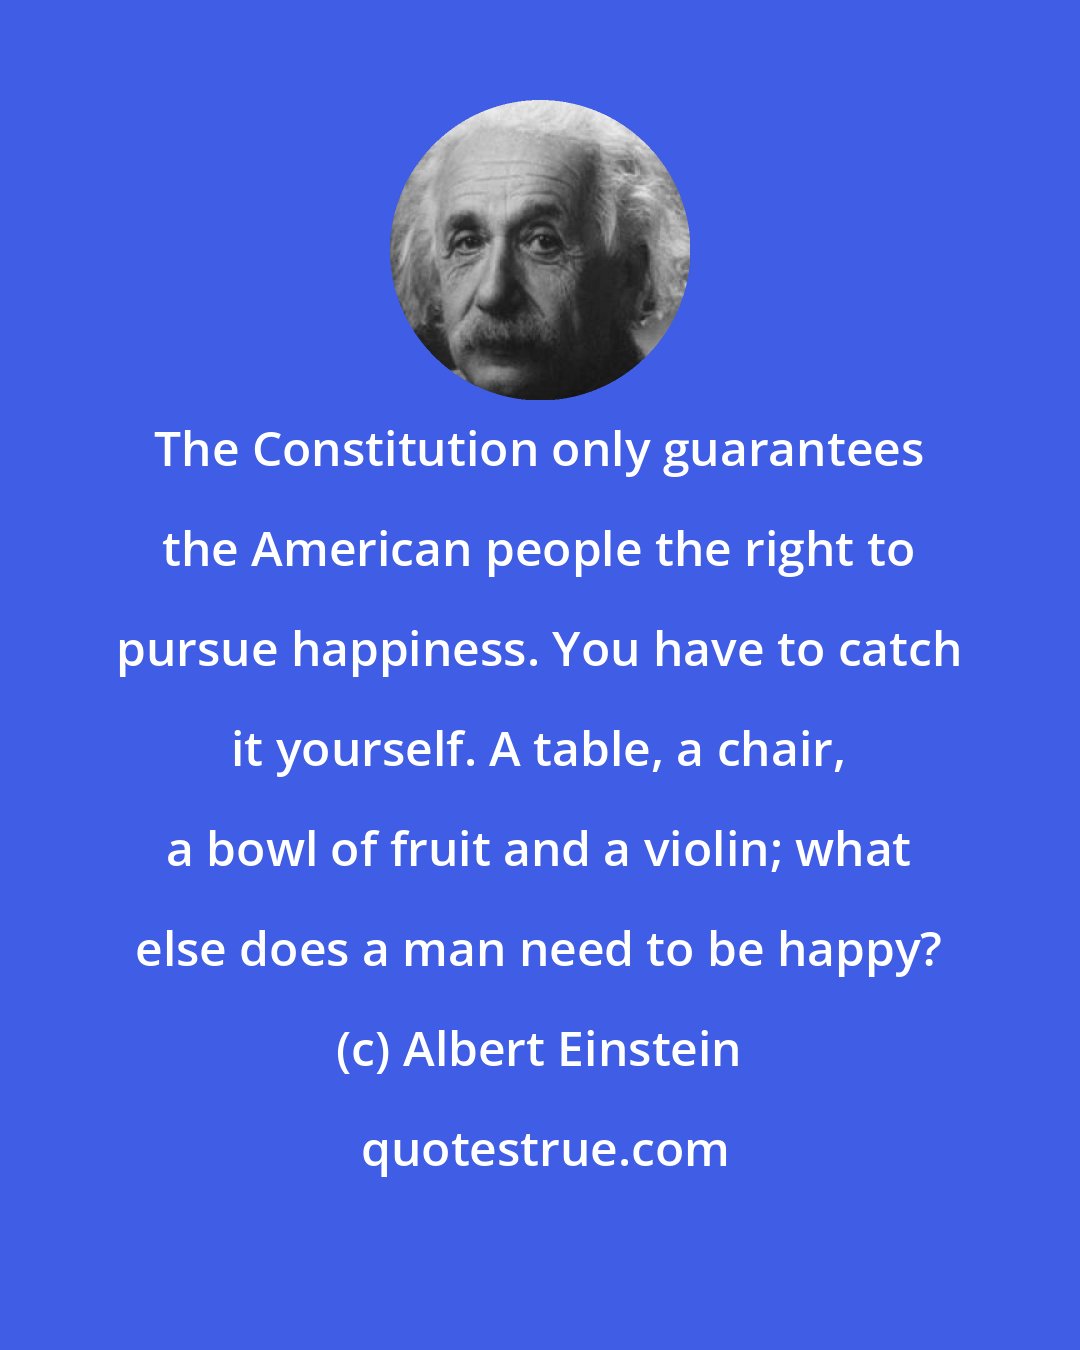 Albert Einstein: The Constitution only guarantees the American people the right to pursue happiness. You have to catch it yourself. A table, a chair, a bowl of fruit and a violin; what else does a man need to be happy?